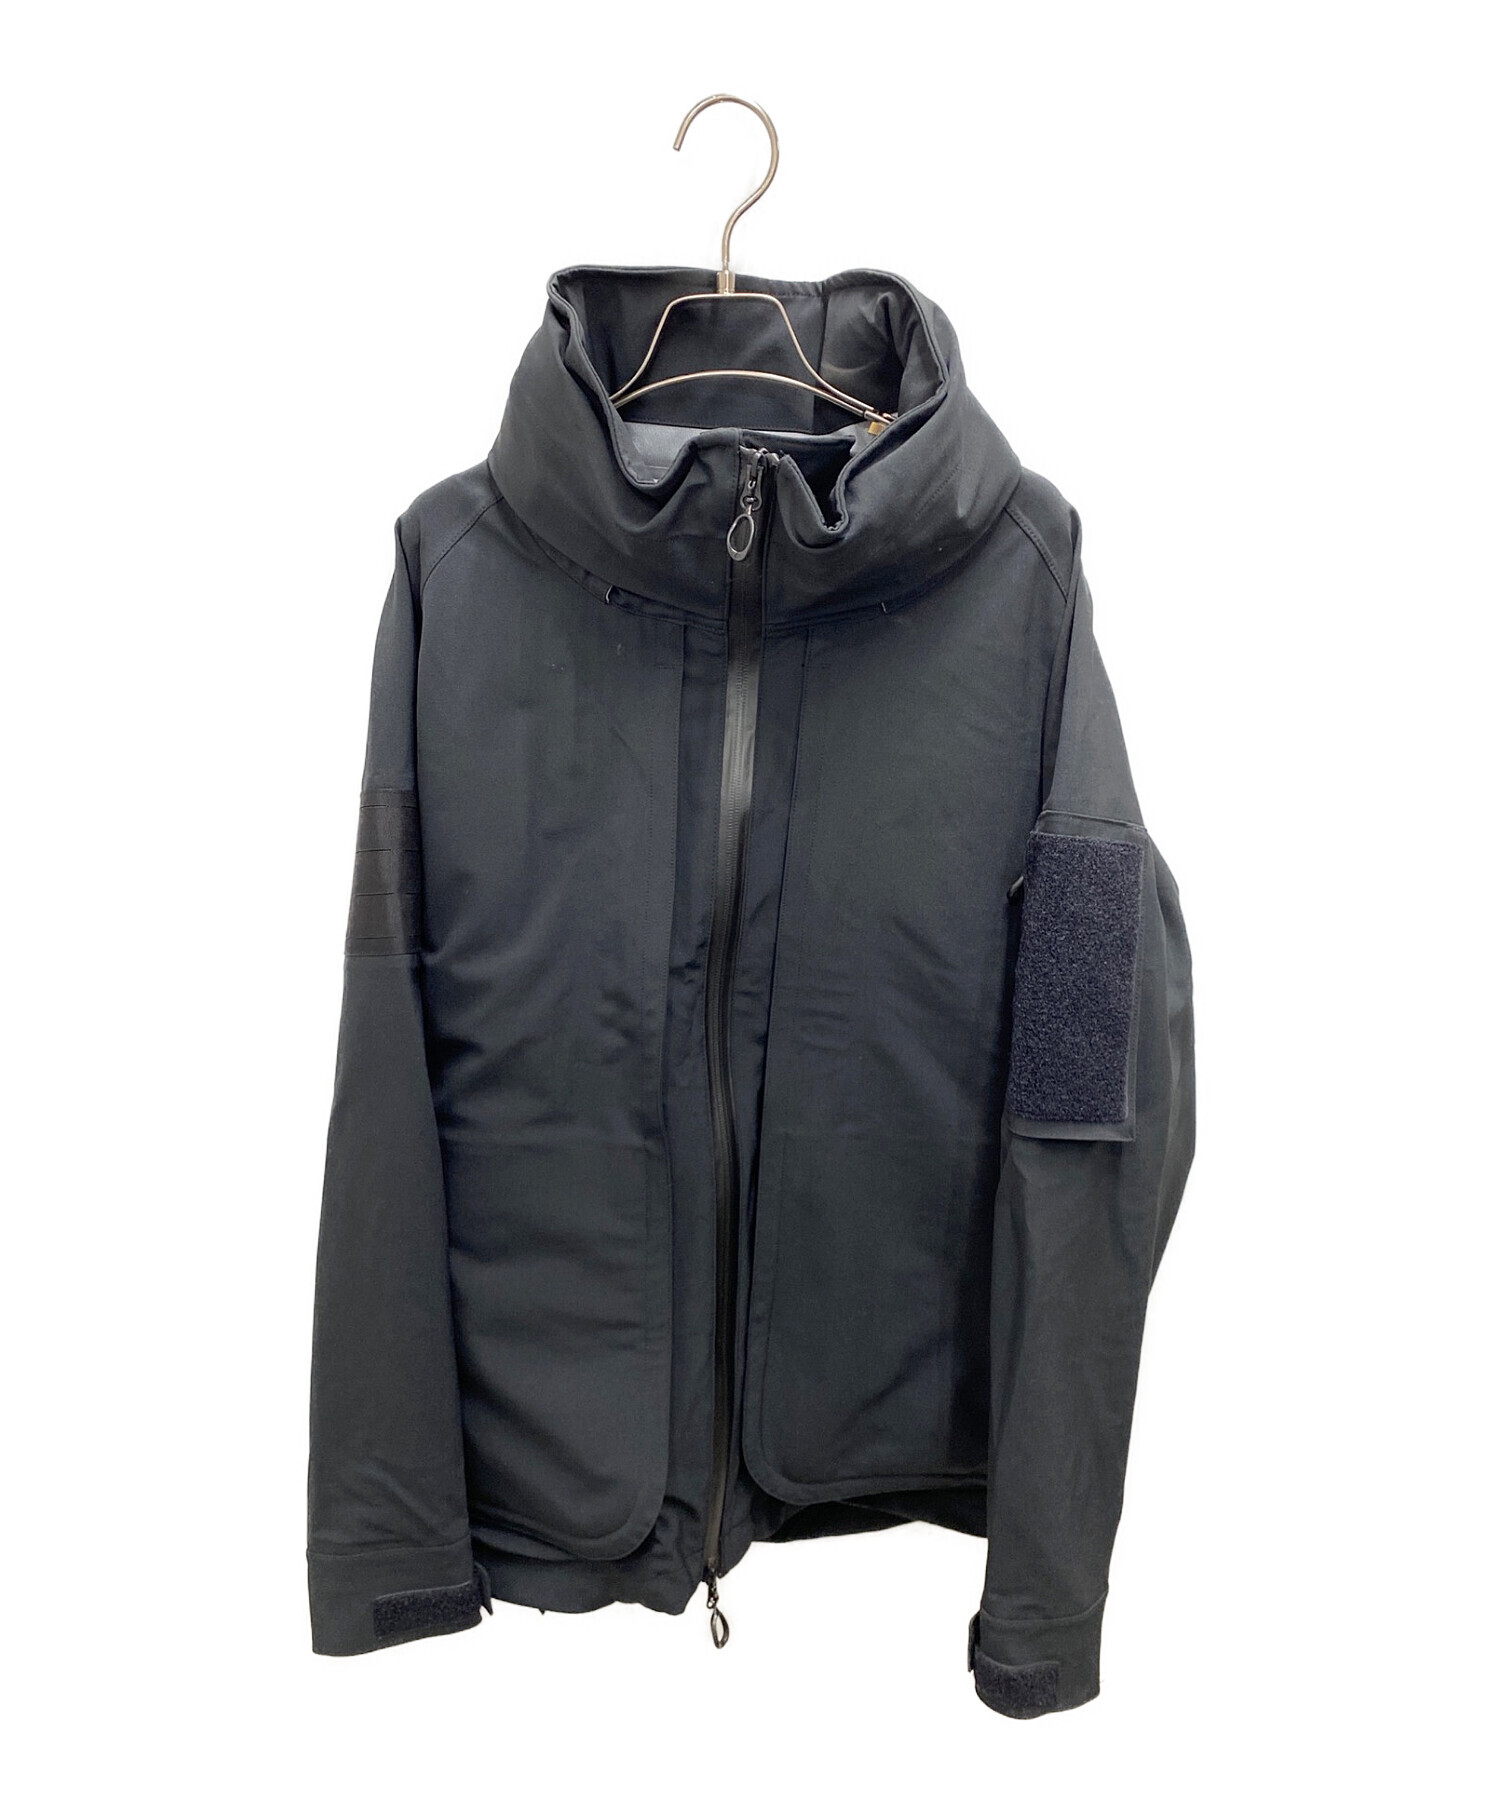 MOUT RECON TAILOR Hardshell Jacket